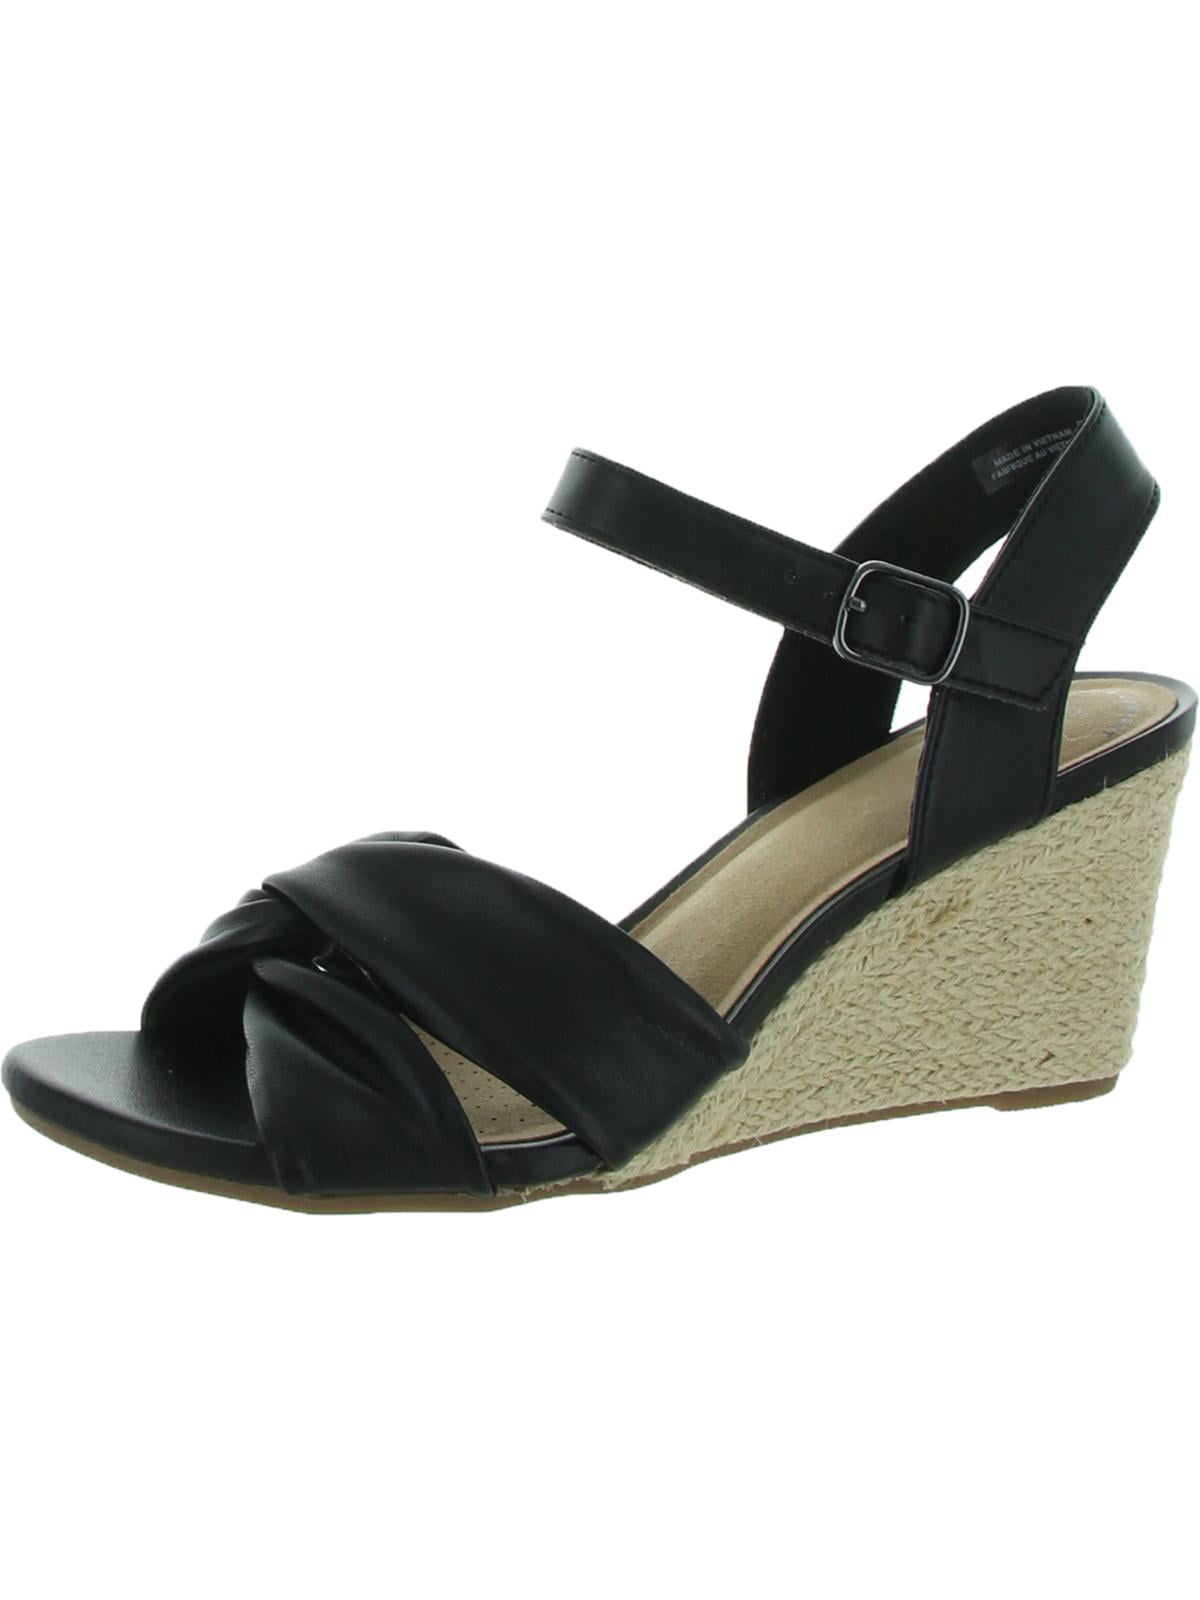 Clarks Margee Beth Women's Faux Leather Slingback Wedge Sandals Black ...